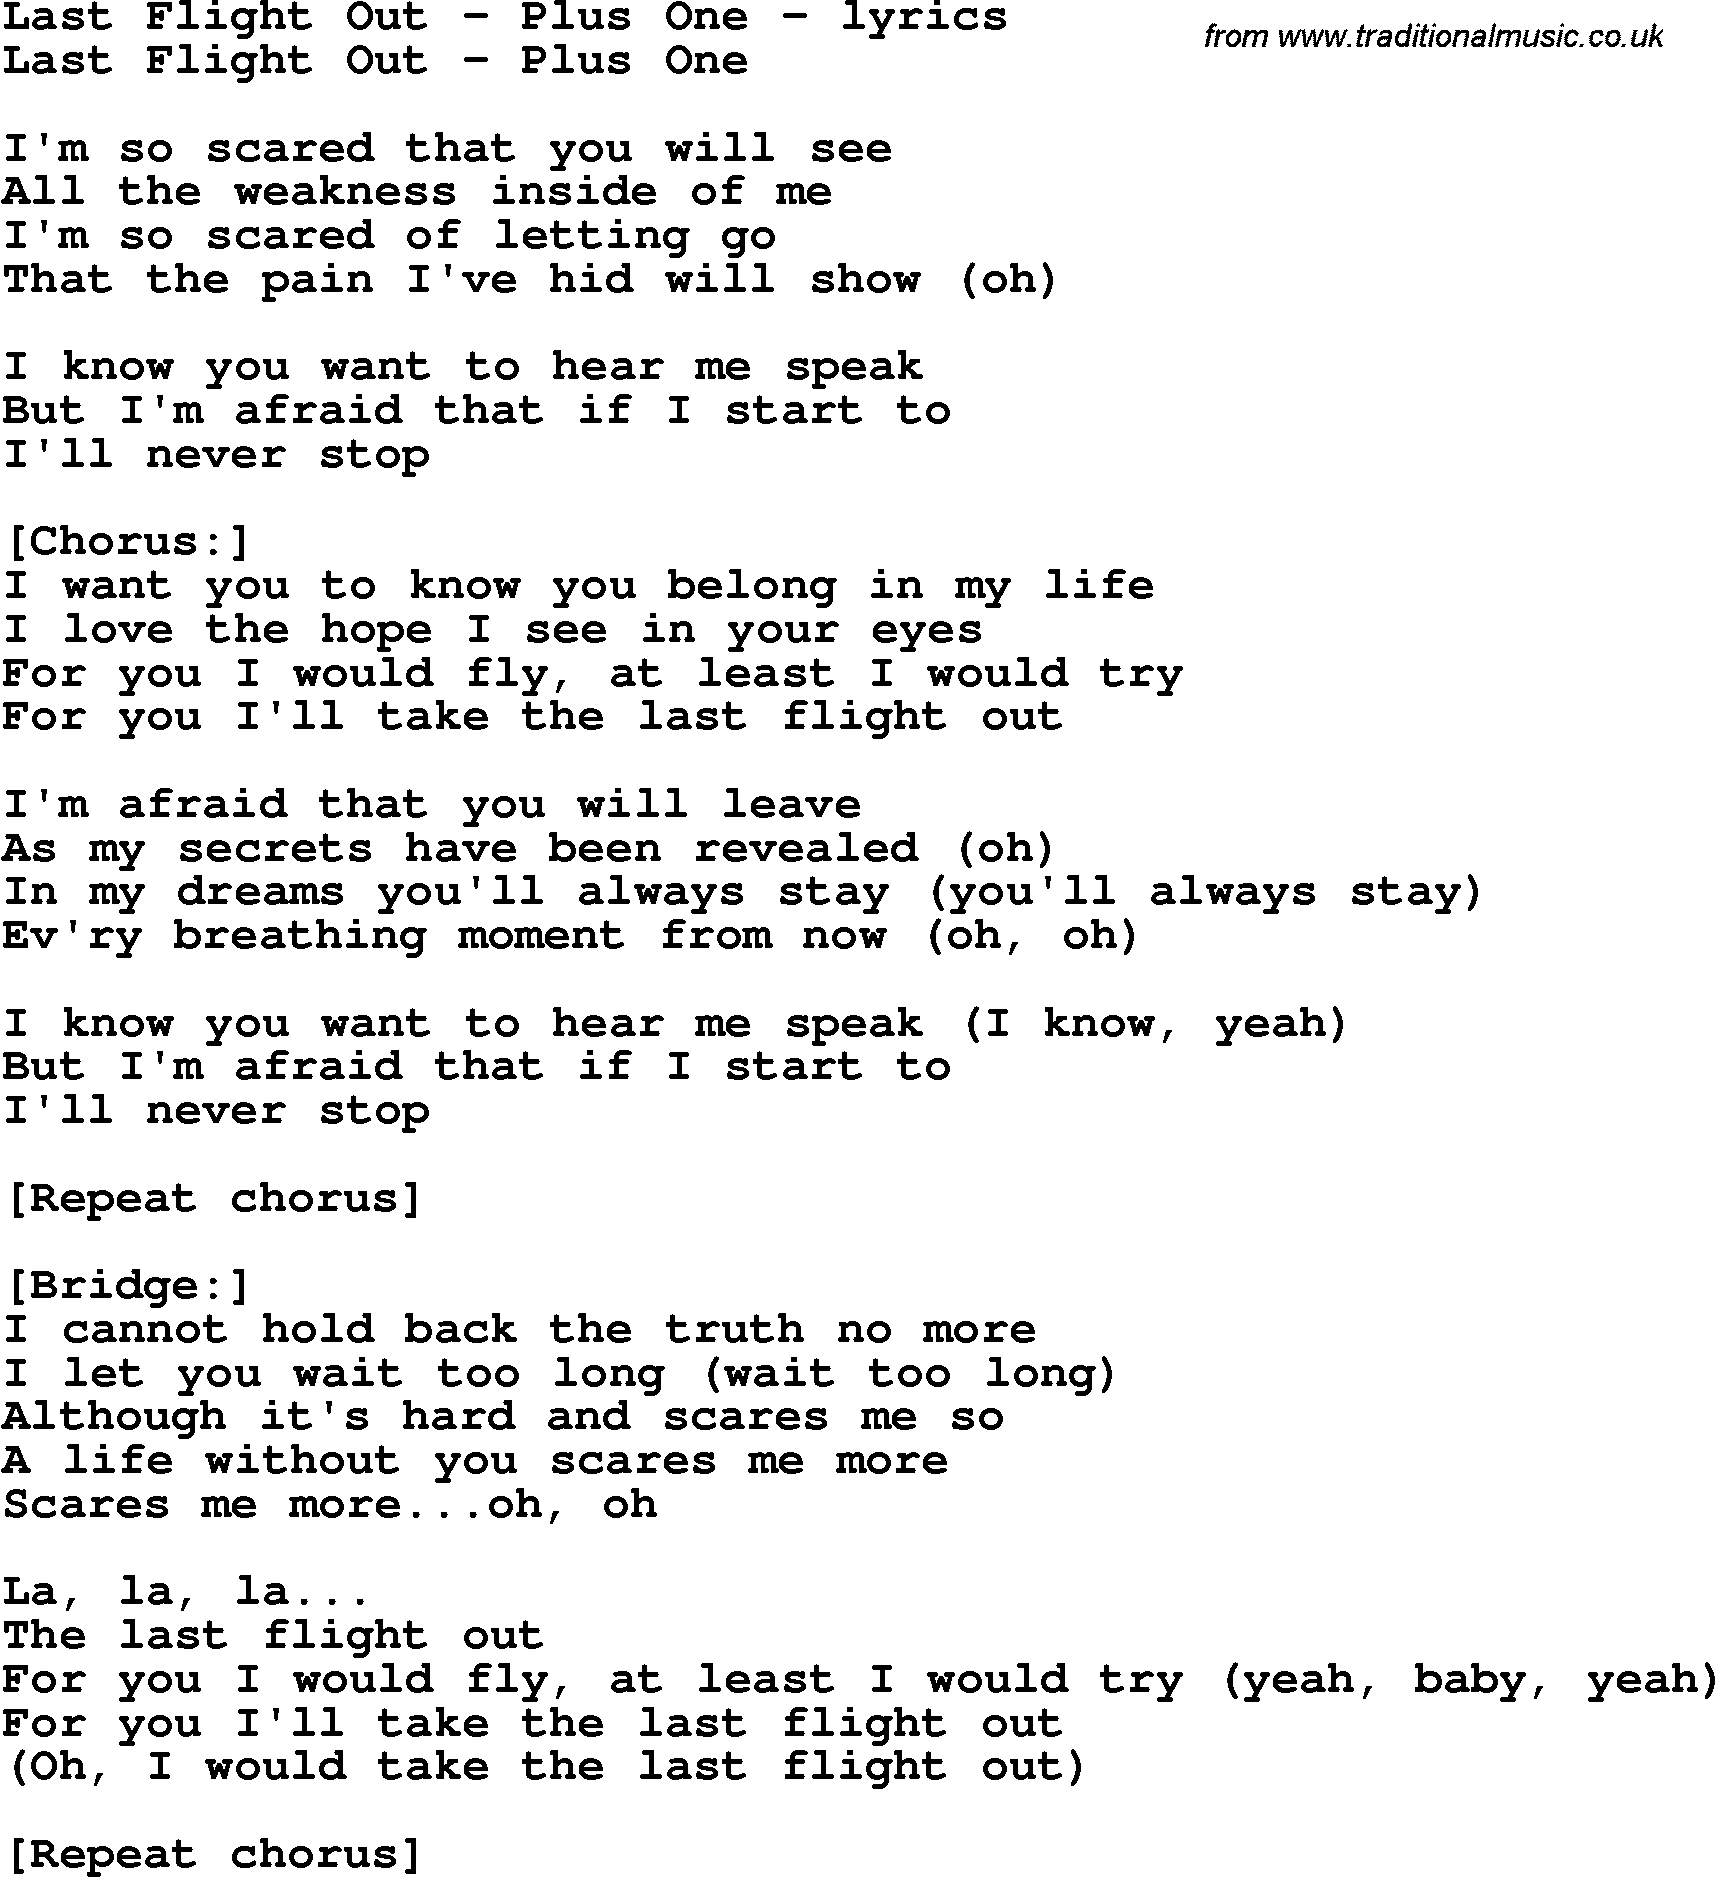 Love Song Lyrics for: Last Flight Out - Plus One